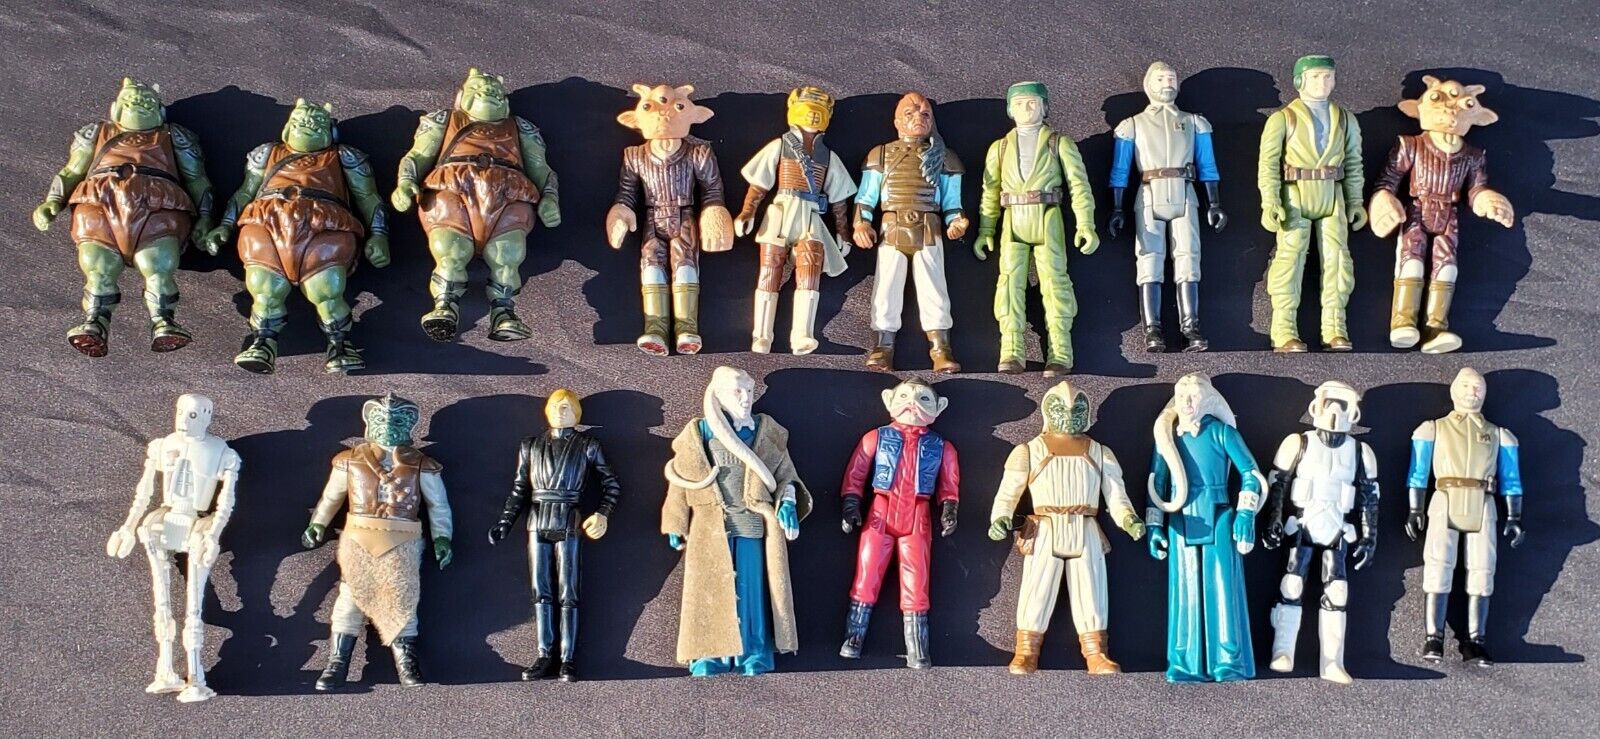 1983 Star Wars Action Figures Rare Lot Of 19 ROTJ ESB M14